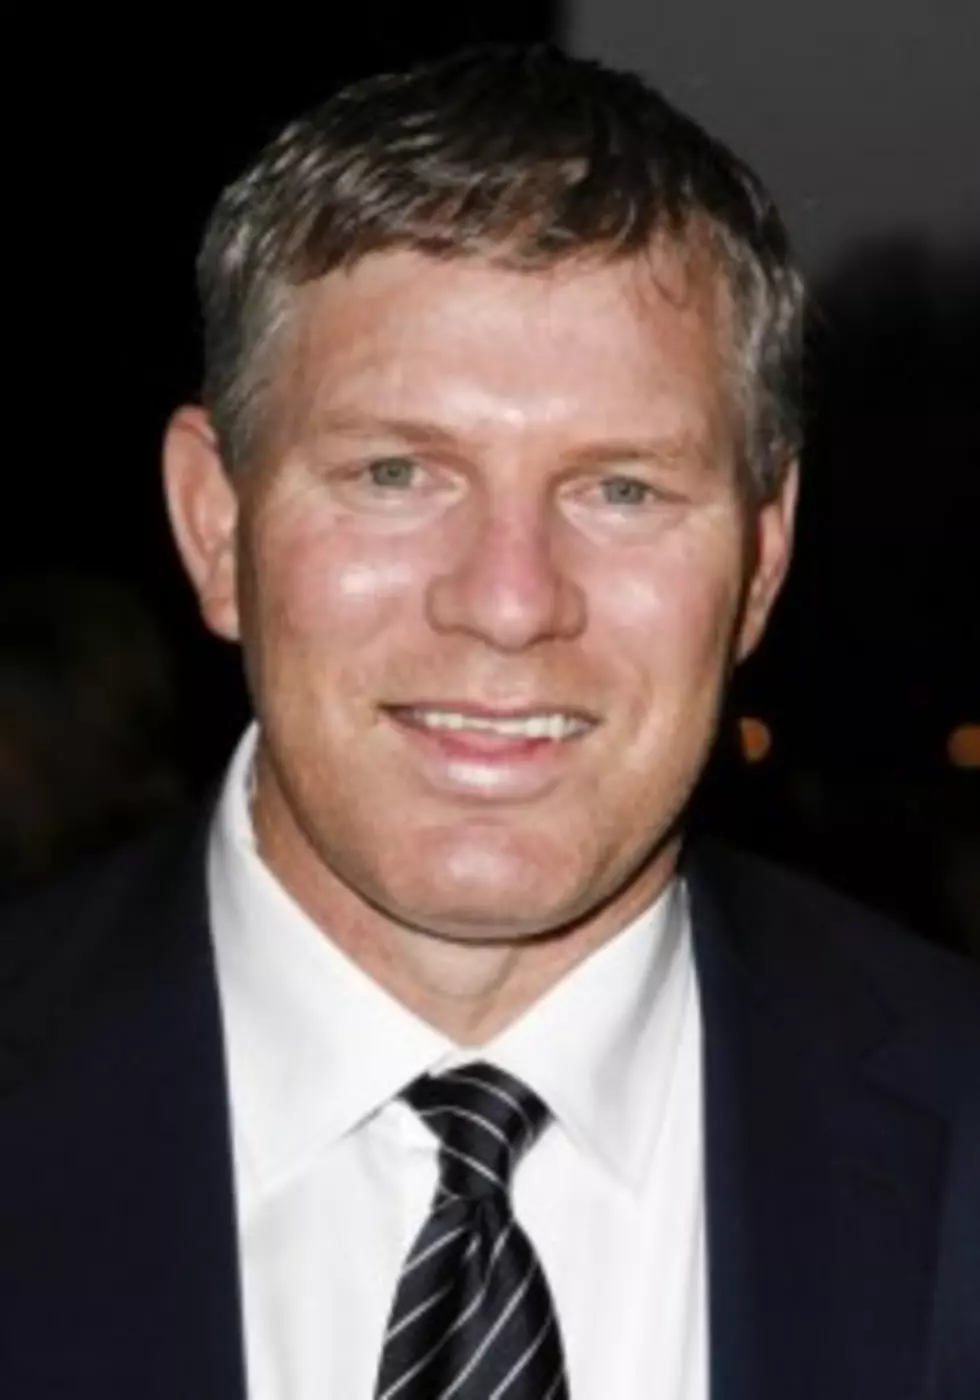 Lenny Dykstra Gets 3 Years In Prison